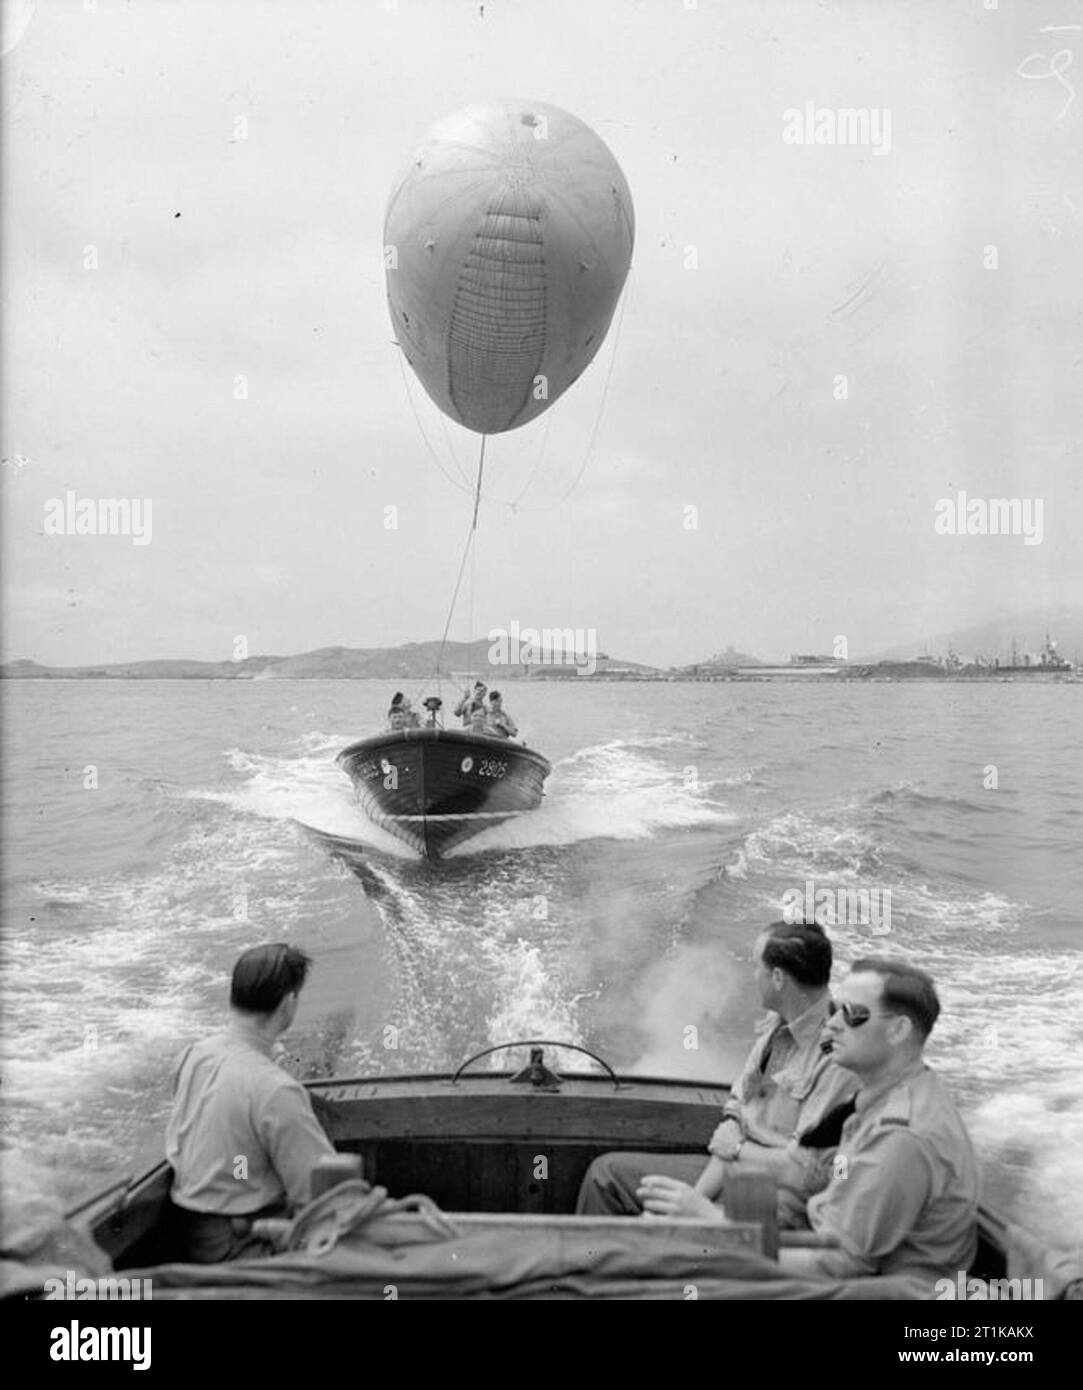 Royal Air Force Operations in the Middle East and North Africa, 1939-1943. Airmen of No. 985 (Balloon) Squadron RAF transferring a Mark VI Kite Balloon to a merchant ship in Bone harbour, Algeria, by towing it to the vessel in a 24-foot Marine Tender. Stock Photo